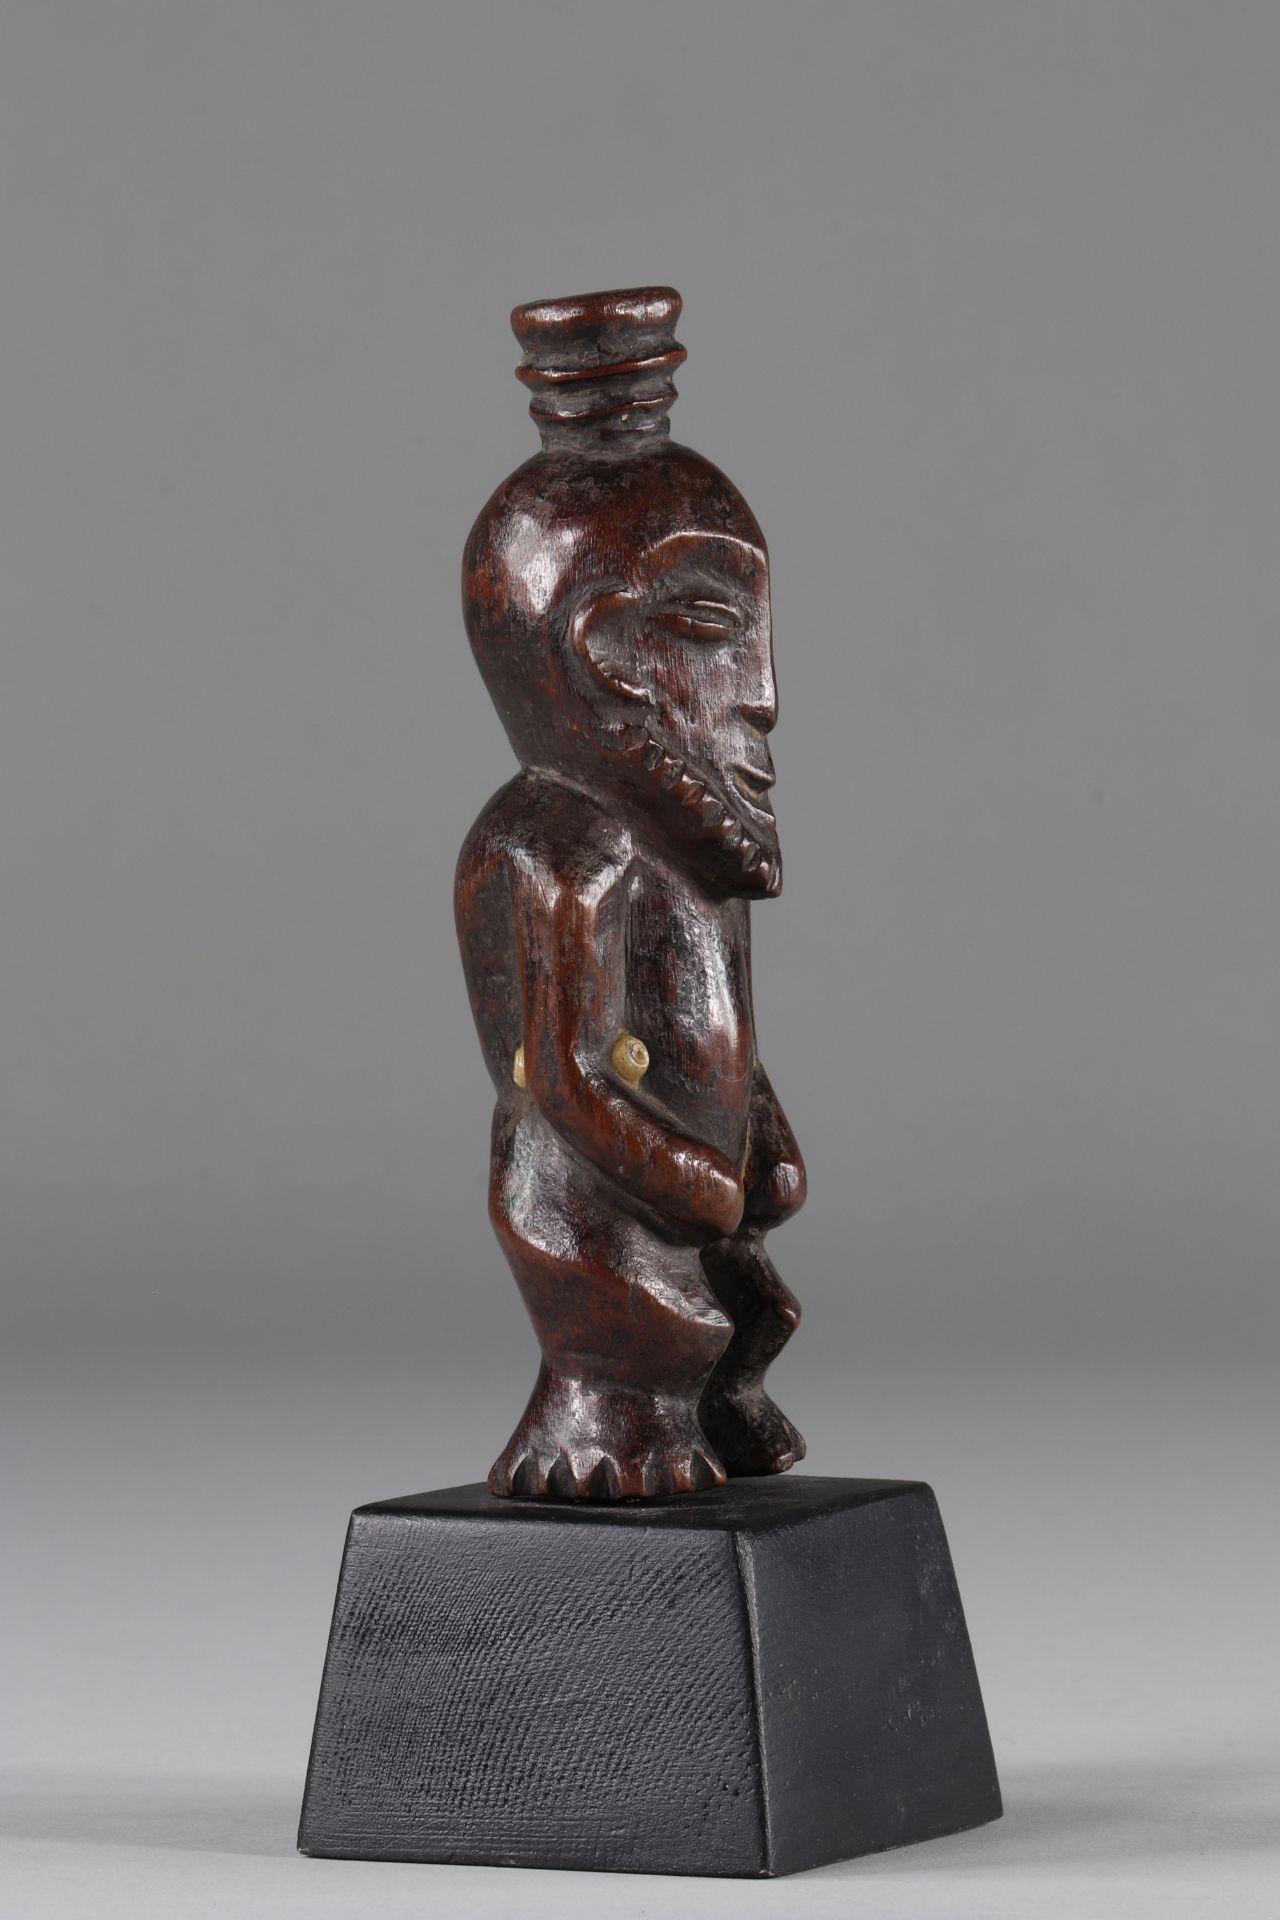 Kusu, DRC, Fetish representing wisdom, wood, glass beads, old patina of use, late 19th early 20th ce - Image 2 of 4